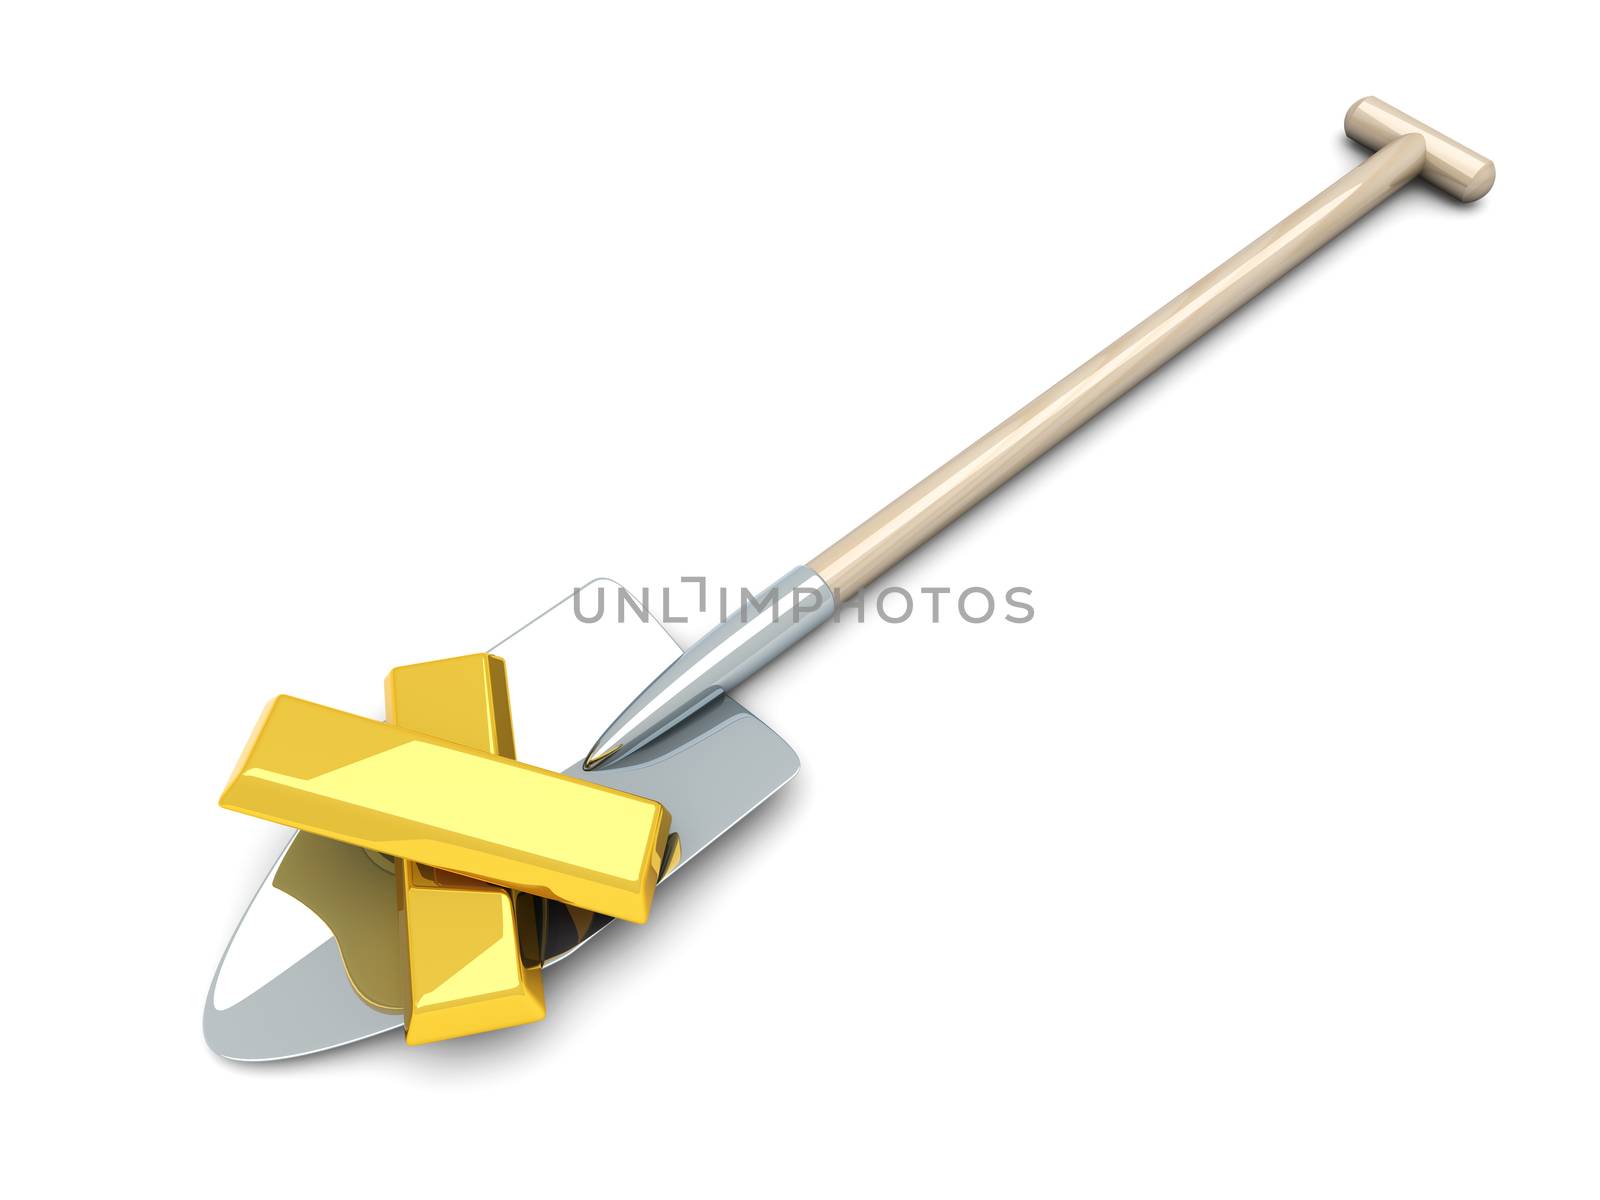 3D rendered Illustration. Isolated on white. Digging out the Gold.